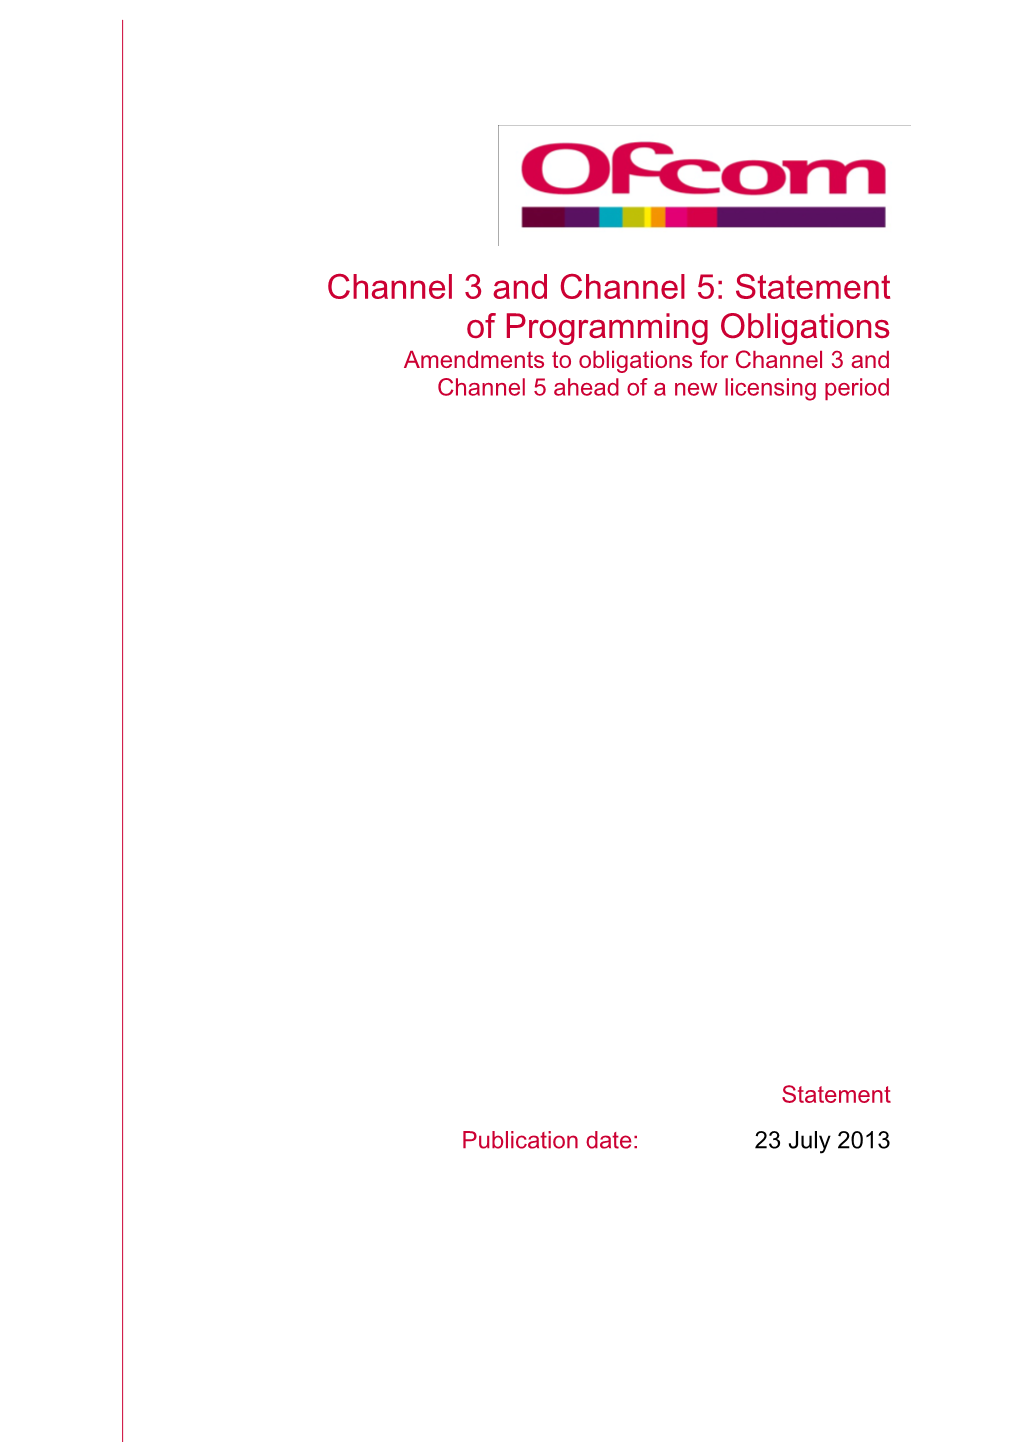 Statement of Programming Obligations Amendments to Obligations for Channel 3 and Channel 5 Ahead of a New Licensing Period